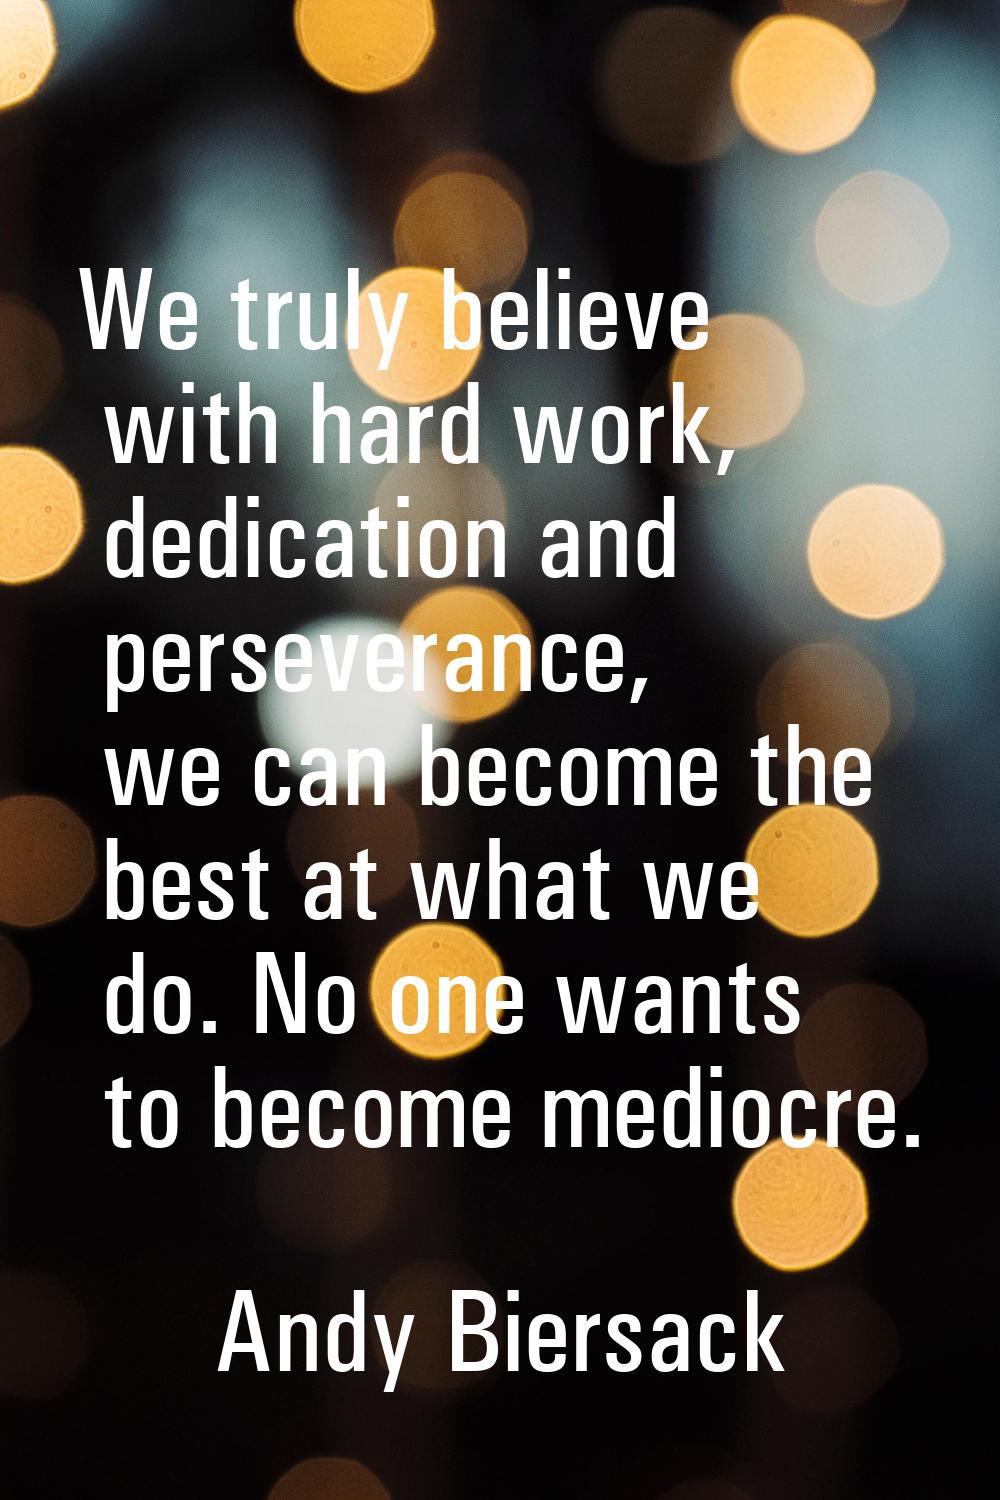 We truly believe with hard work, dedication and perseverance, we can become the best at what we do.